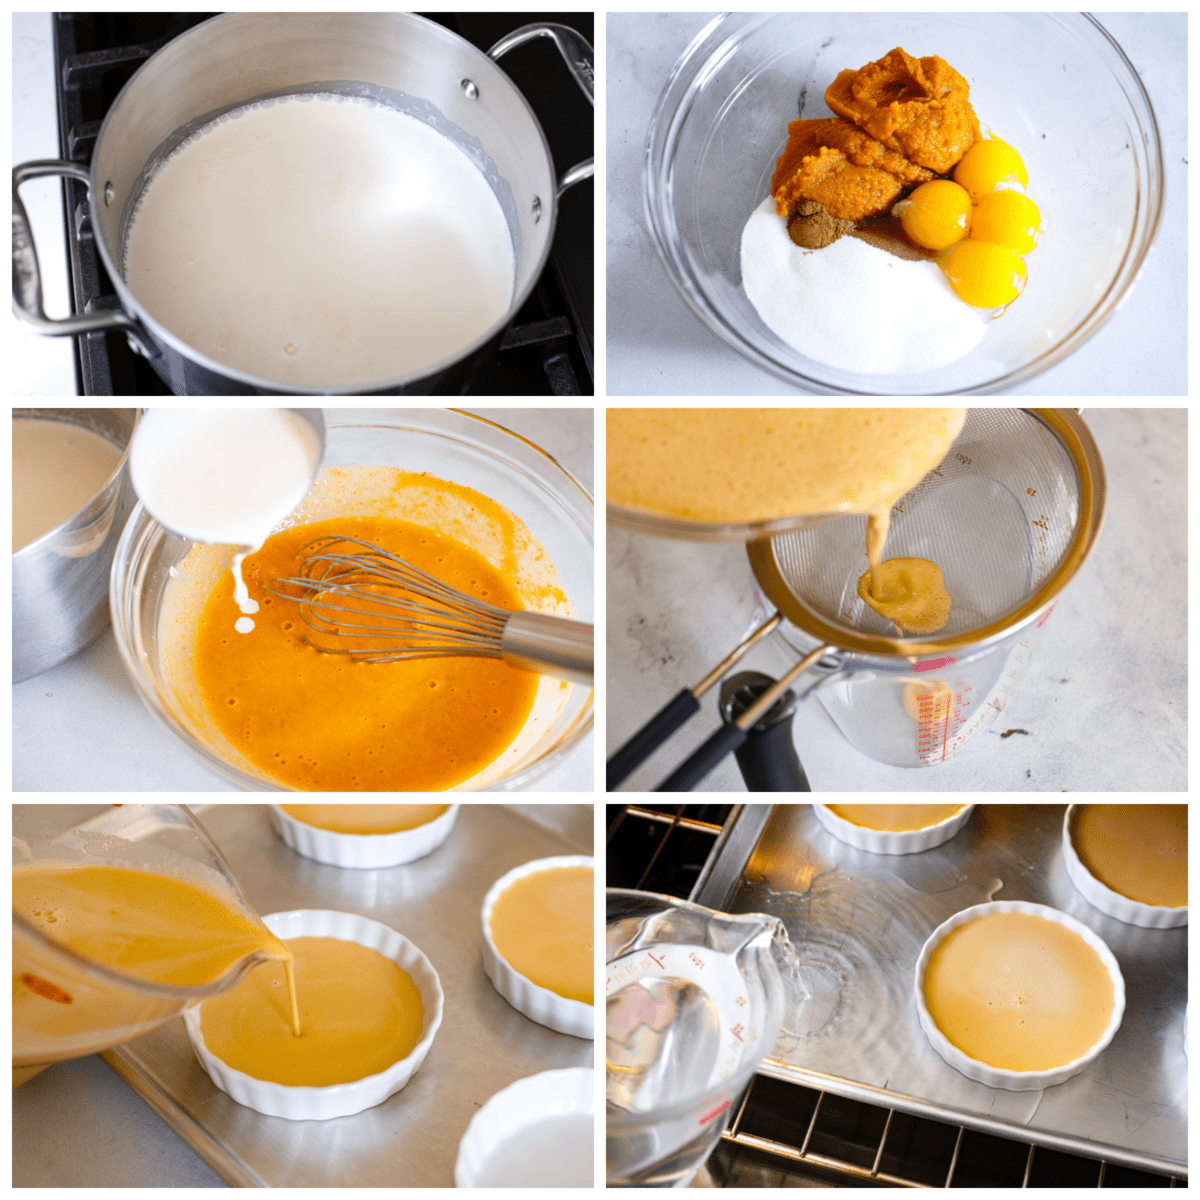 First photo of cream heating on the stove. Second photo of the pumpkin, sugar, egg yolks, and cinnamon in a bowl. Third photo of the hot cream added to the pumpkin mixture. Fourth photo of the custard being strained. Fifth photo of the custard pouring into the ramekins. Sixth photo of the water pouring around the ramekins on a cookie sheet. 